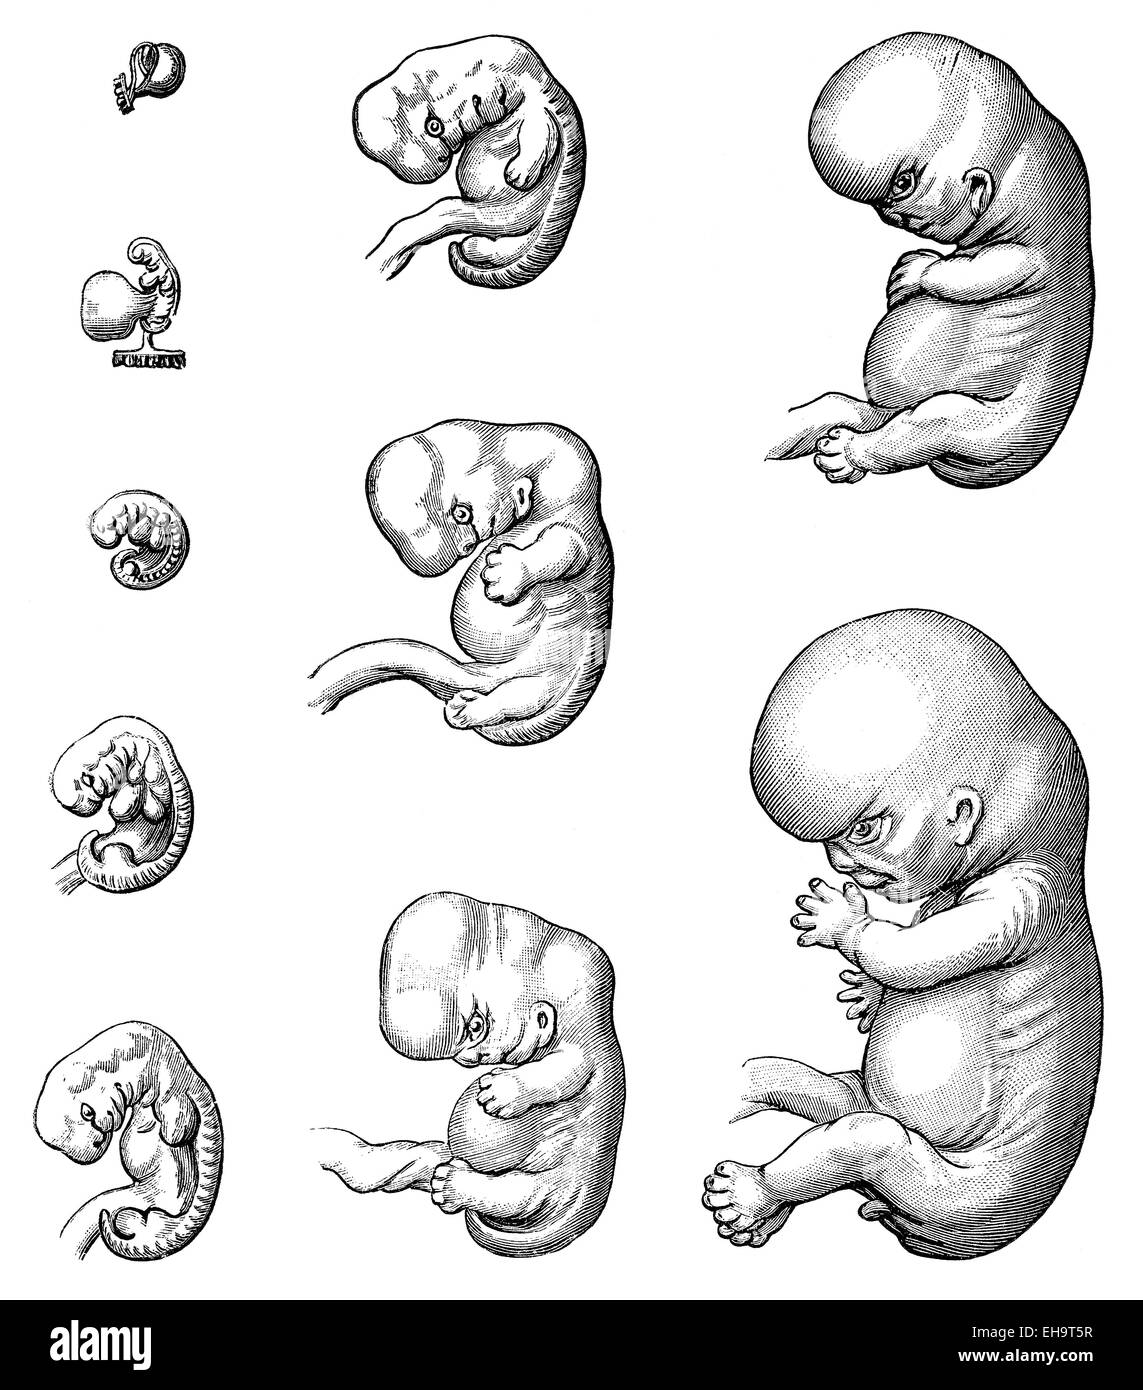 Development, the embryo up to the 9th week, 19th century, Stock Photo